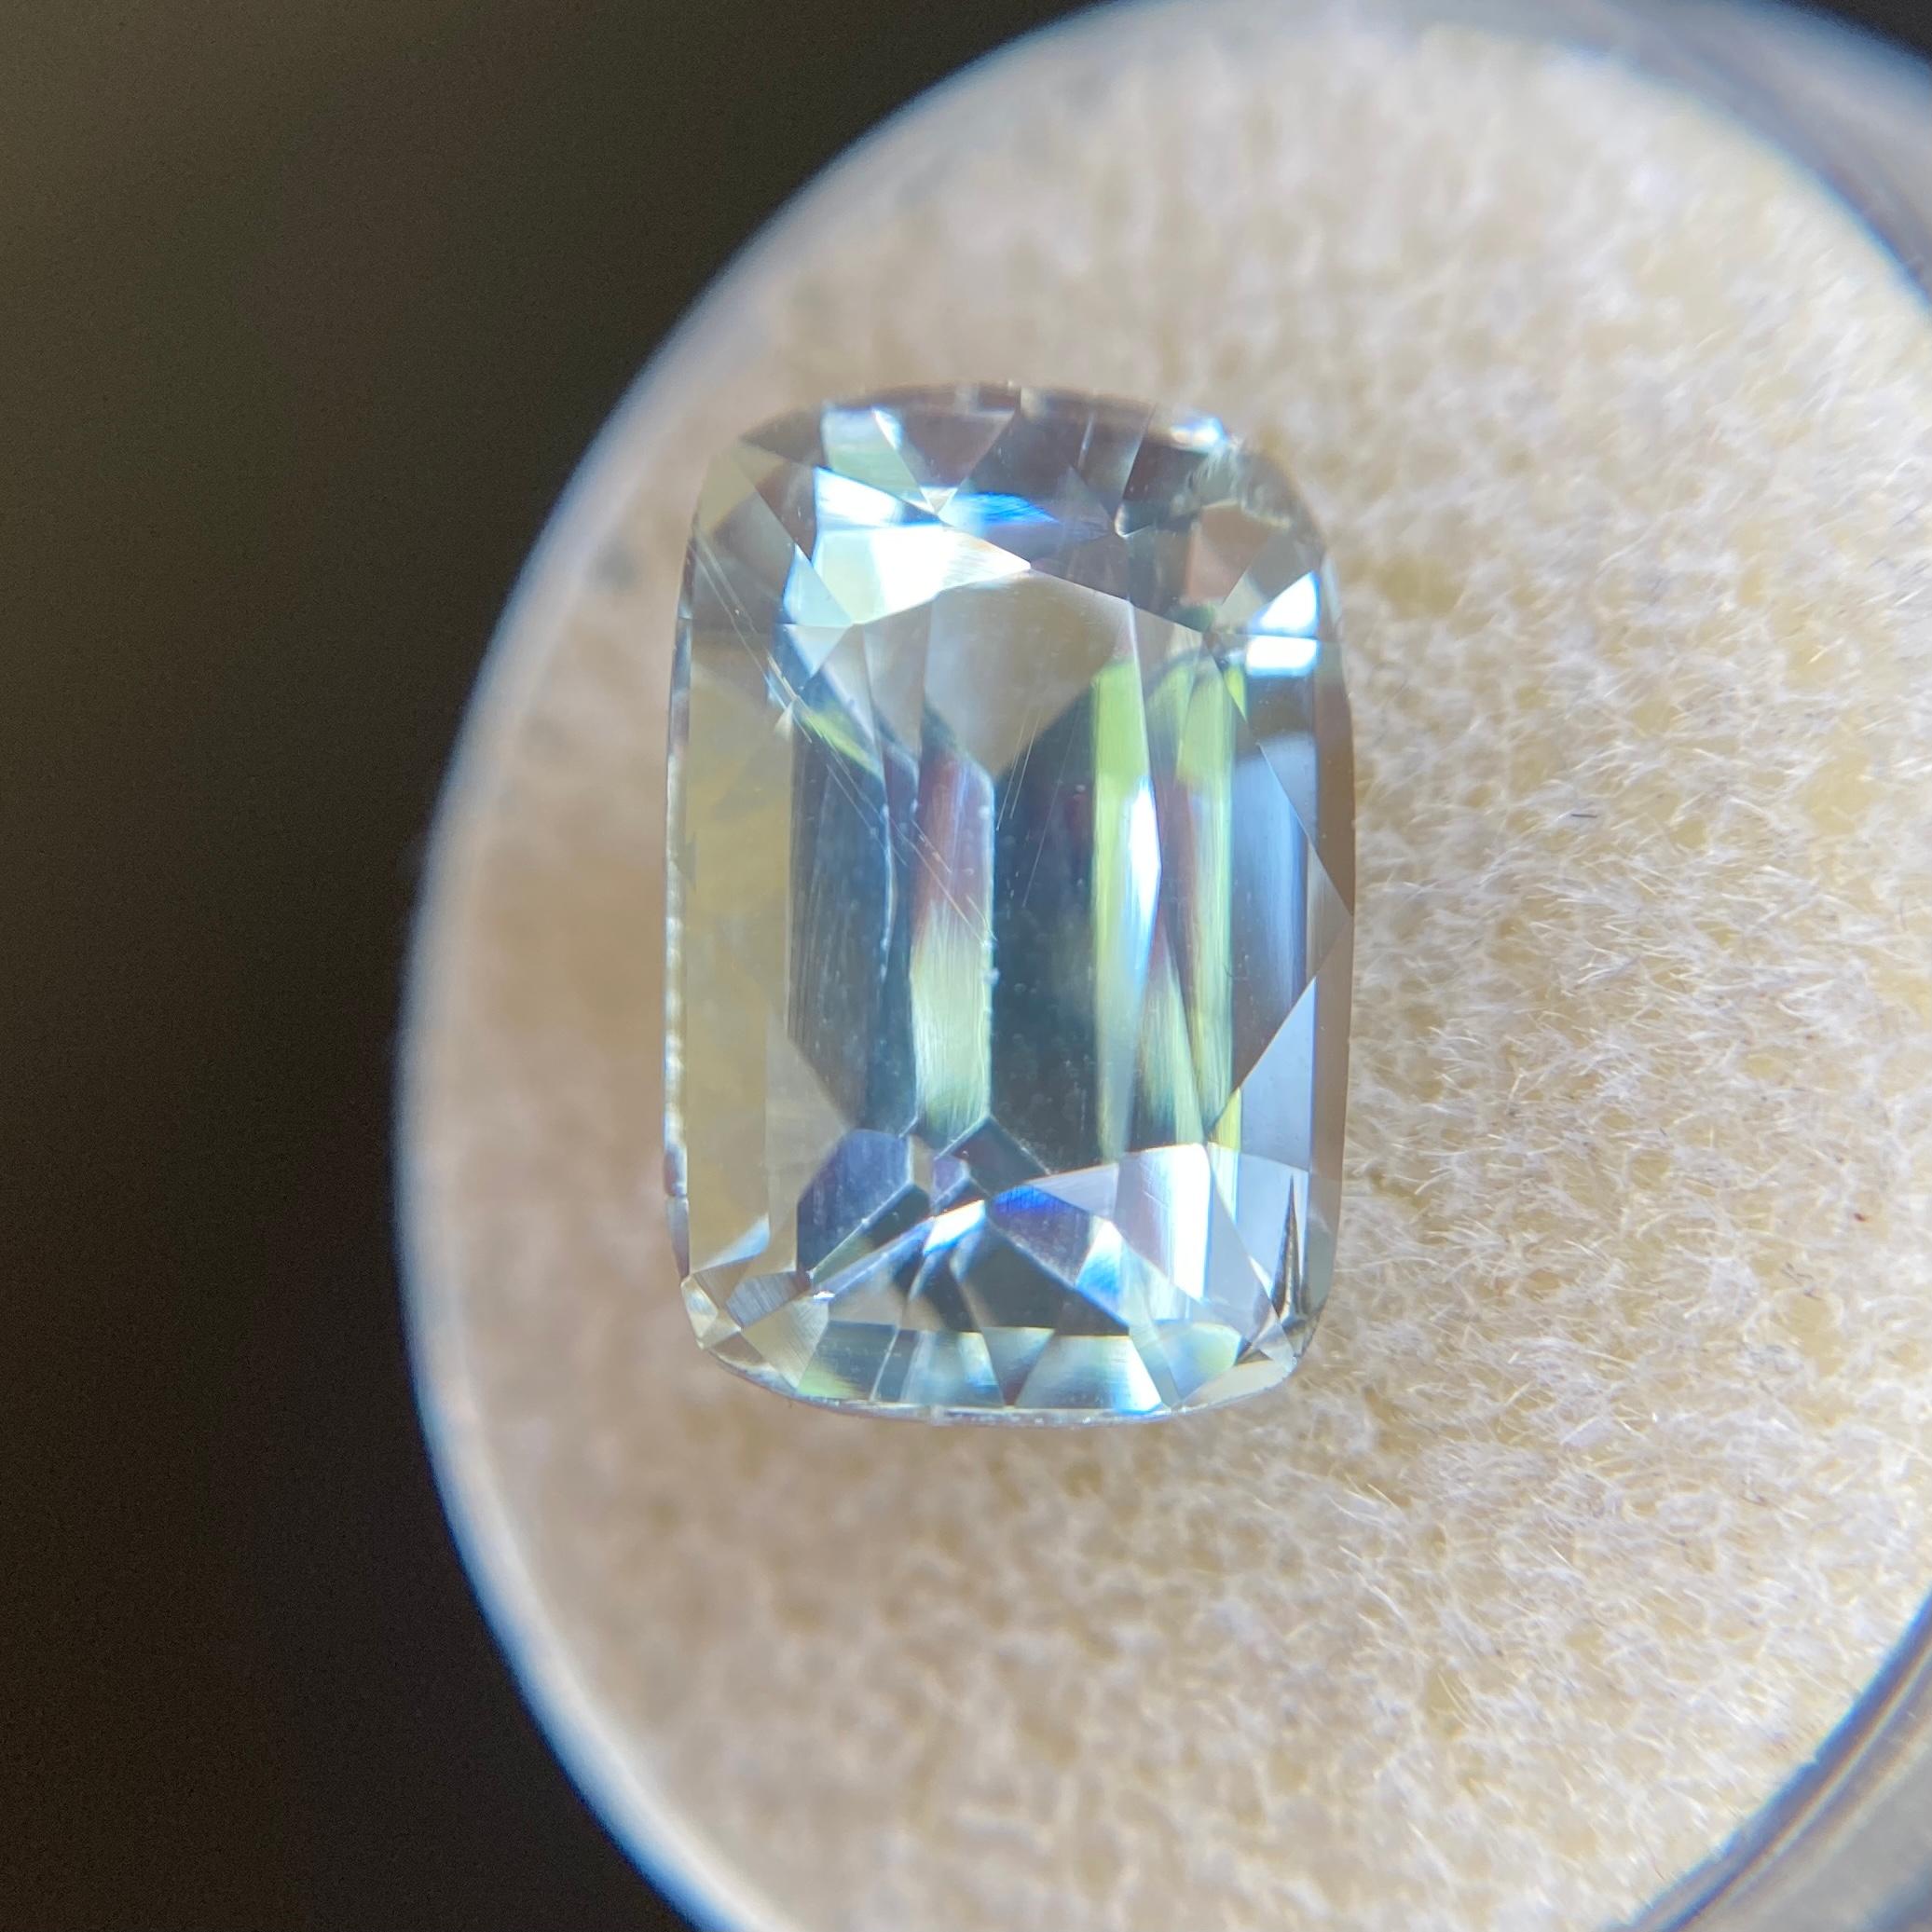 Natural Bright Blue Aquamarine Gemstone.

6.06 Carat with a beautiful bright blue colour and good clarity. A clean gem with only some small natural inclusions visible when looking closely.

Also has an excellent cushion cut with ideal polish to show